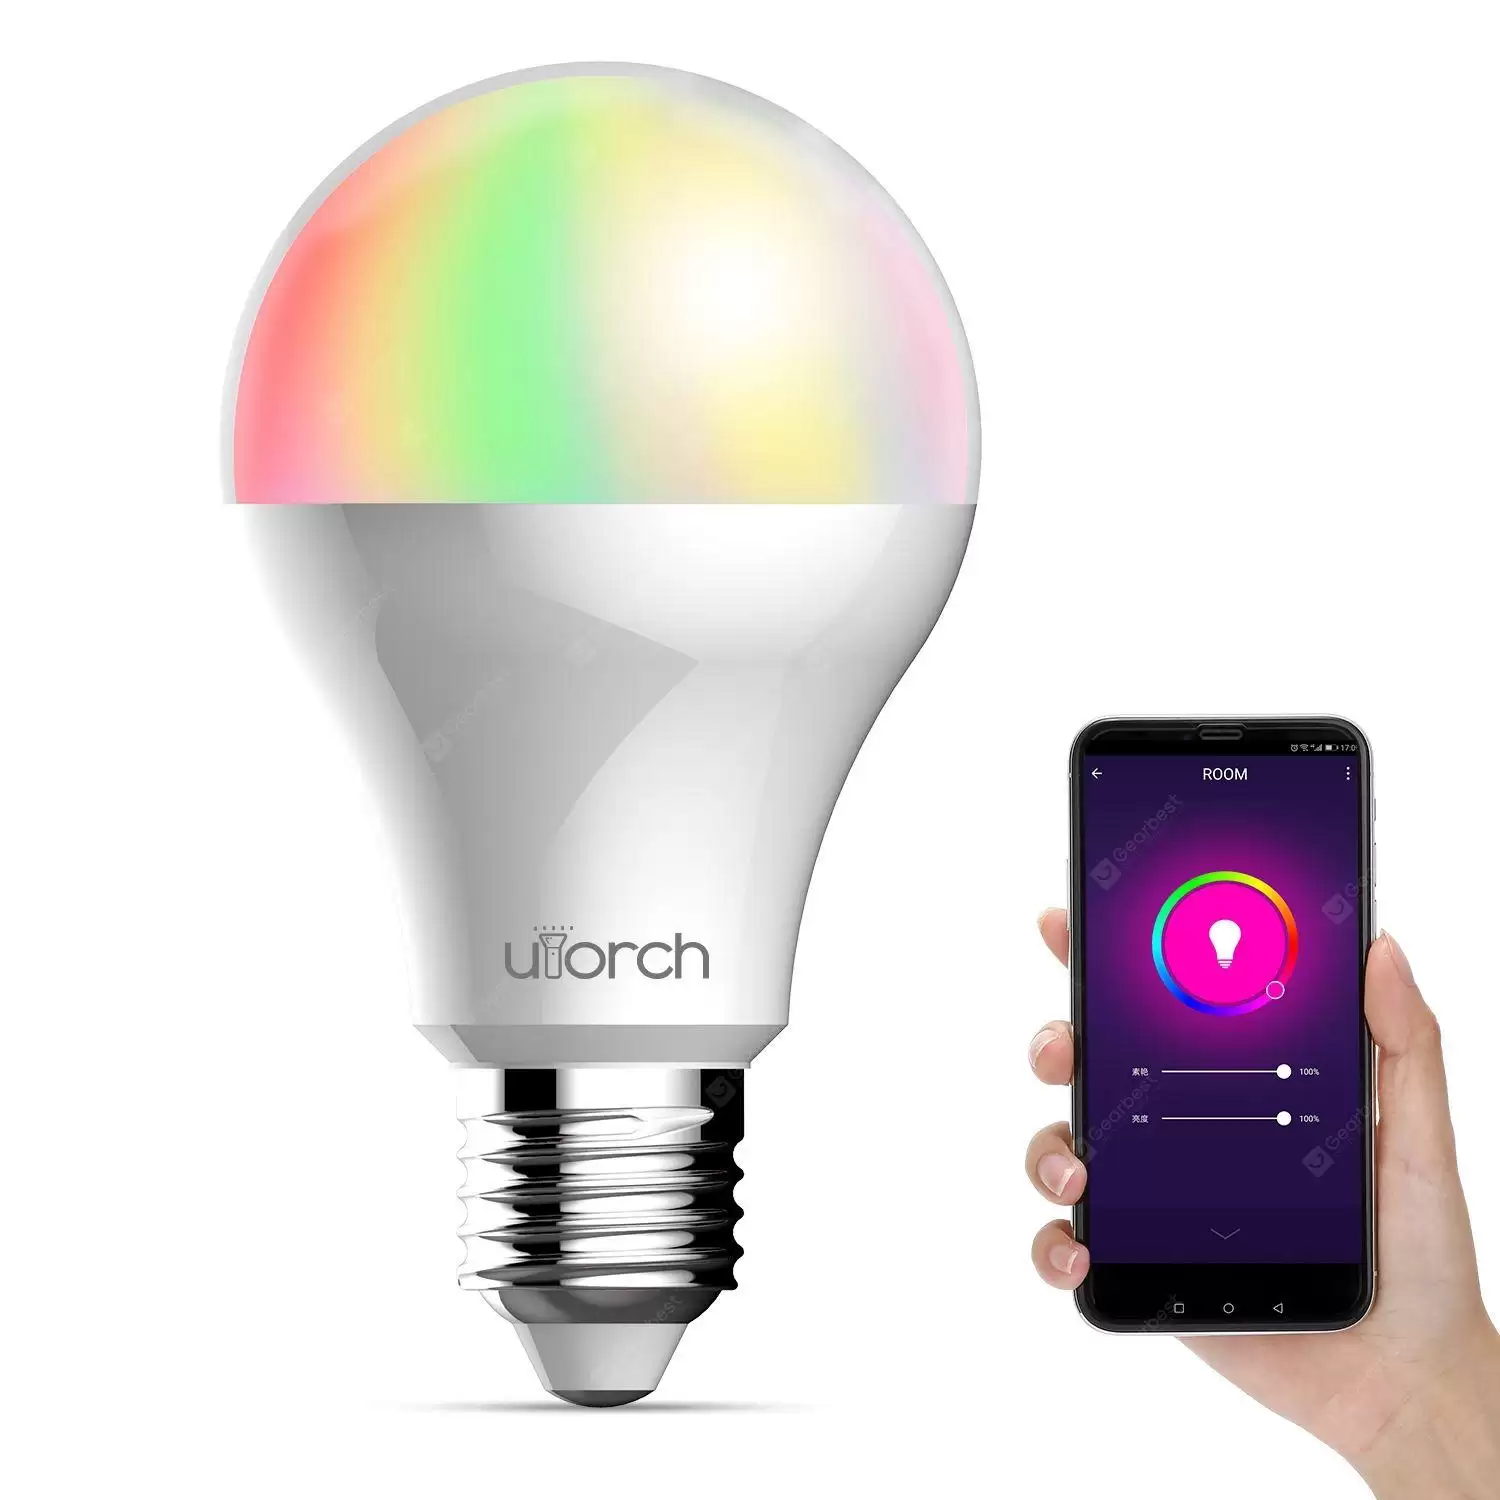 Order In Just $9.99 Utorch Bw - 5 E27 Voice Control Smart Wifi Colorful Light Bulb At Gearbest With This Coupon